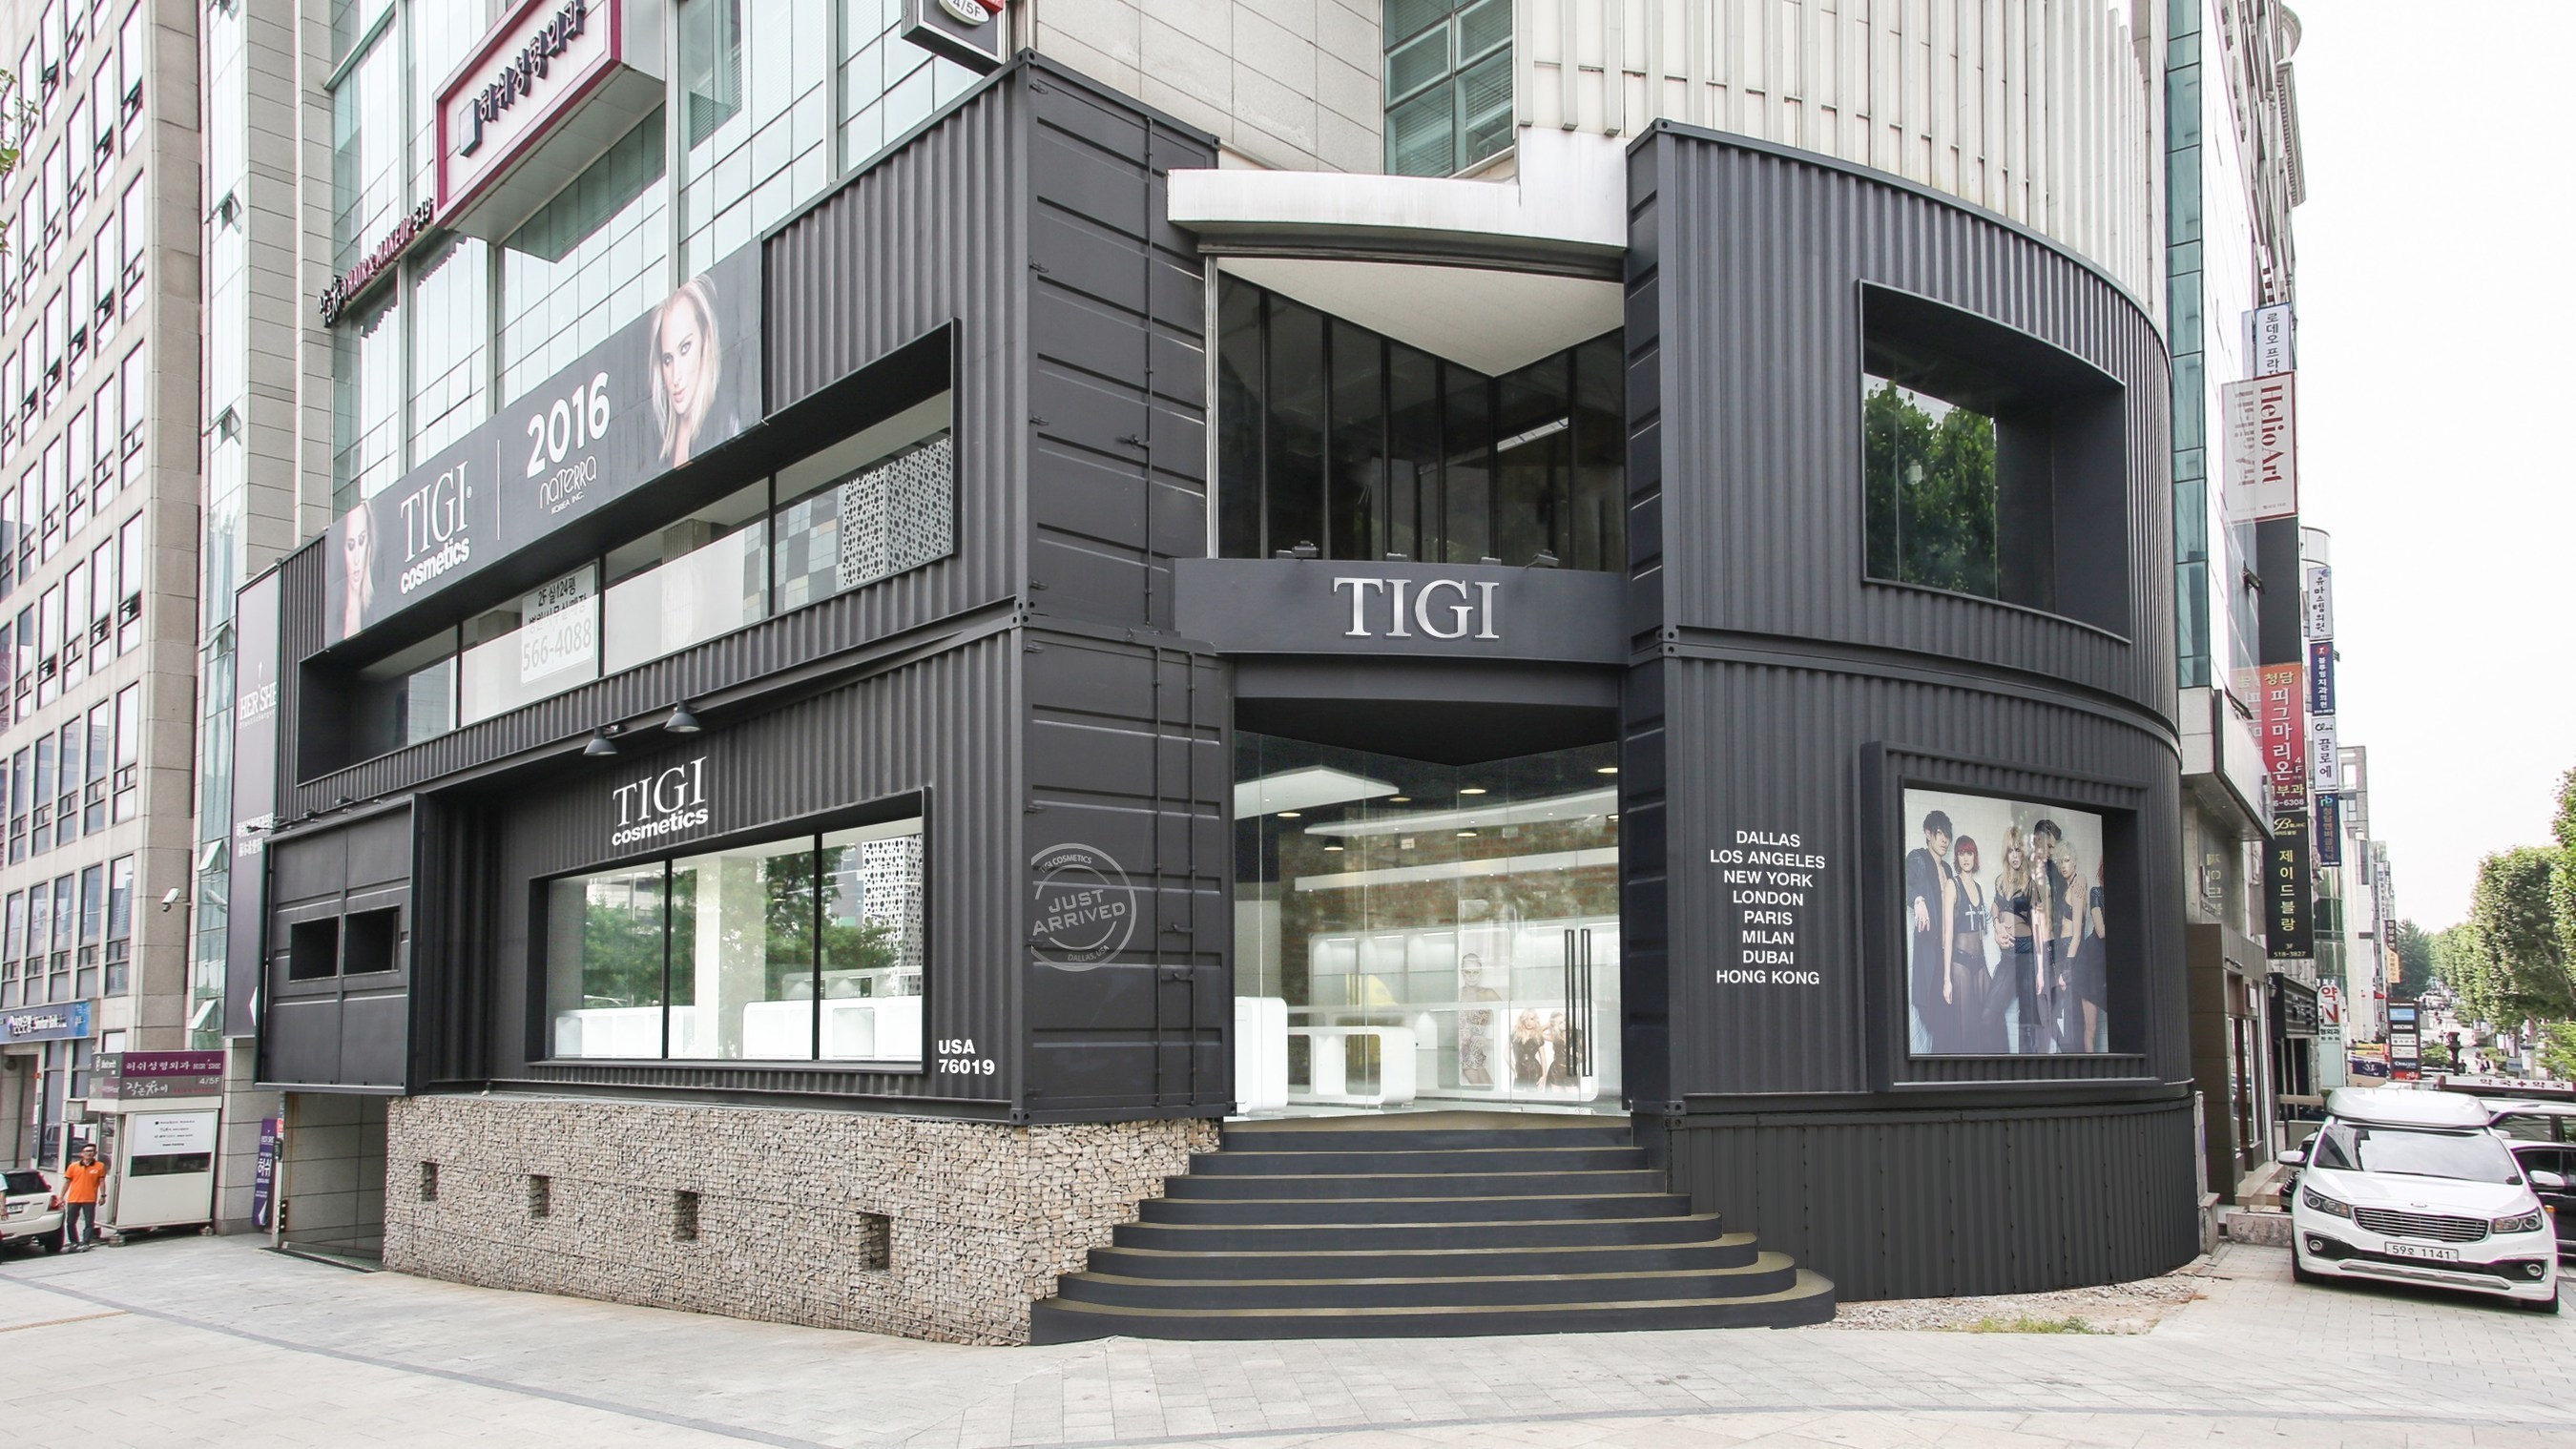 U.S. beauty and personal care company Naterra announces the July 1, 2016 opening of the first Naterra Korea store. The impressive new retail space is located on the luxury high-street Cheongdam crossroads and will serve as the official Korean flagship store for Naterra and the home of TIGI, the popular global professional cosmetics and hair care brand. (Photo provided by Naterra)